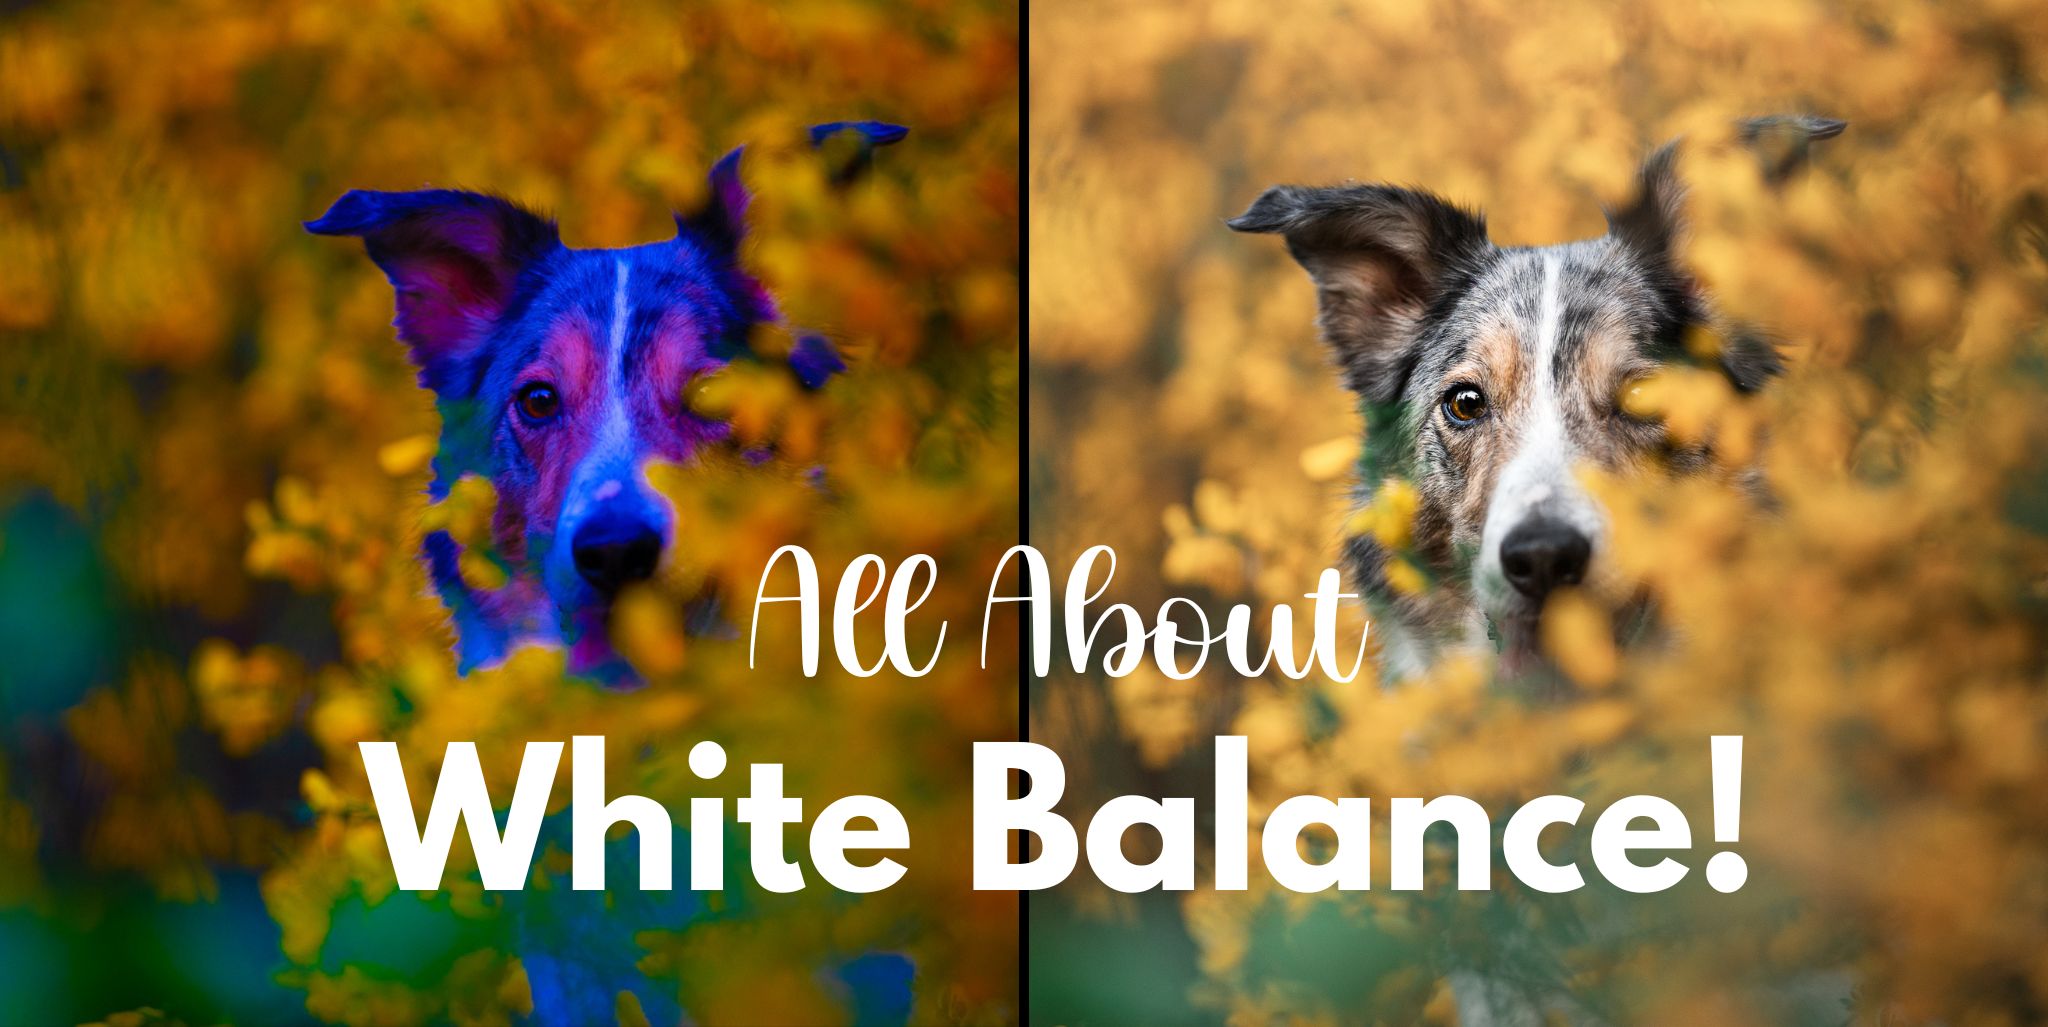 All About White Balance